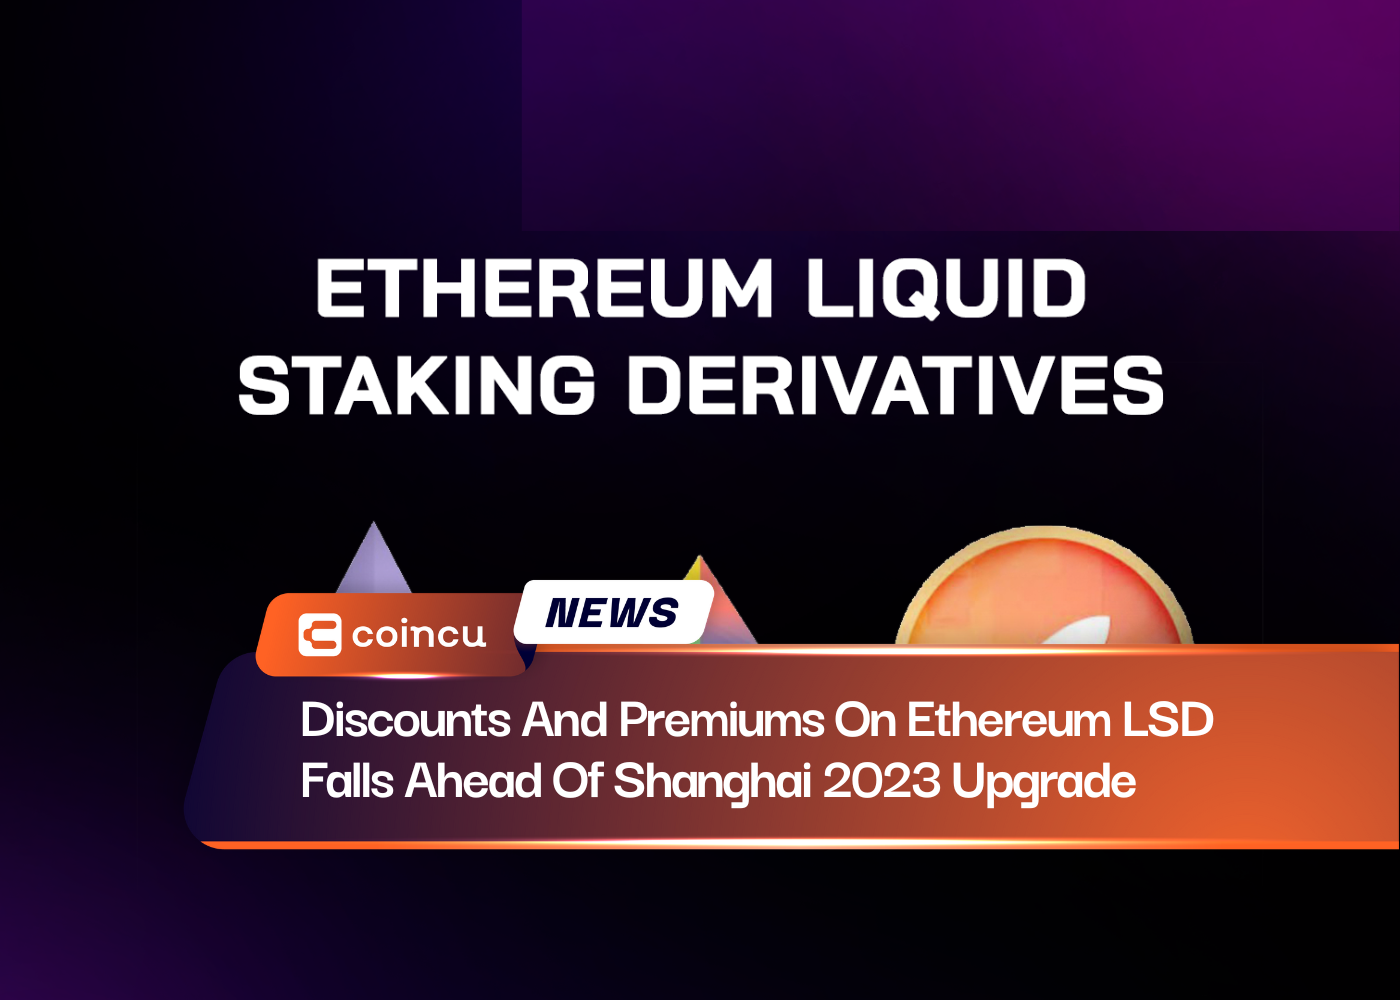 Discounts And Premiums On Ethereum LSD Falls Ahead Of Shanghai 2023 Upgrade